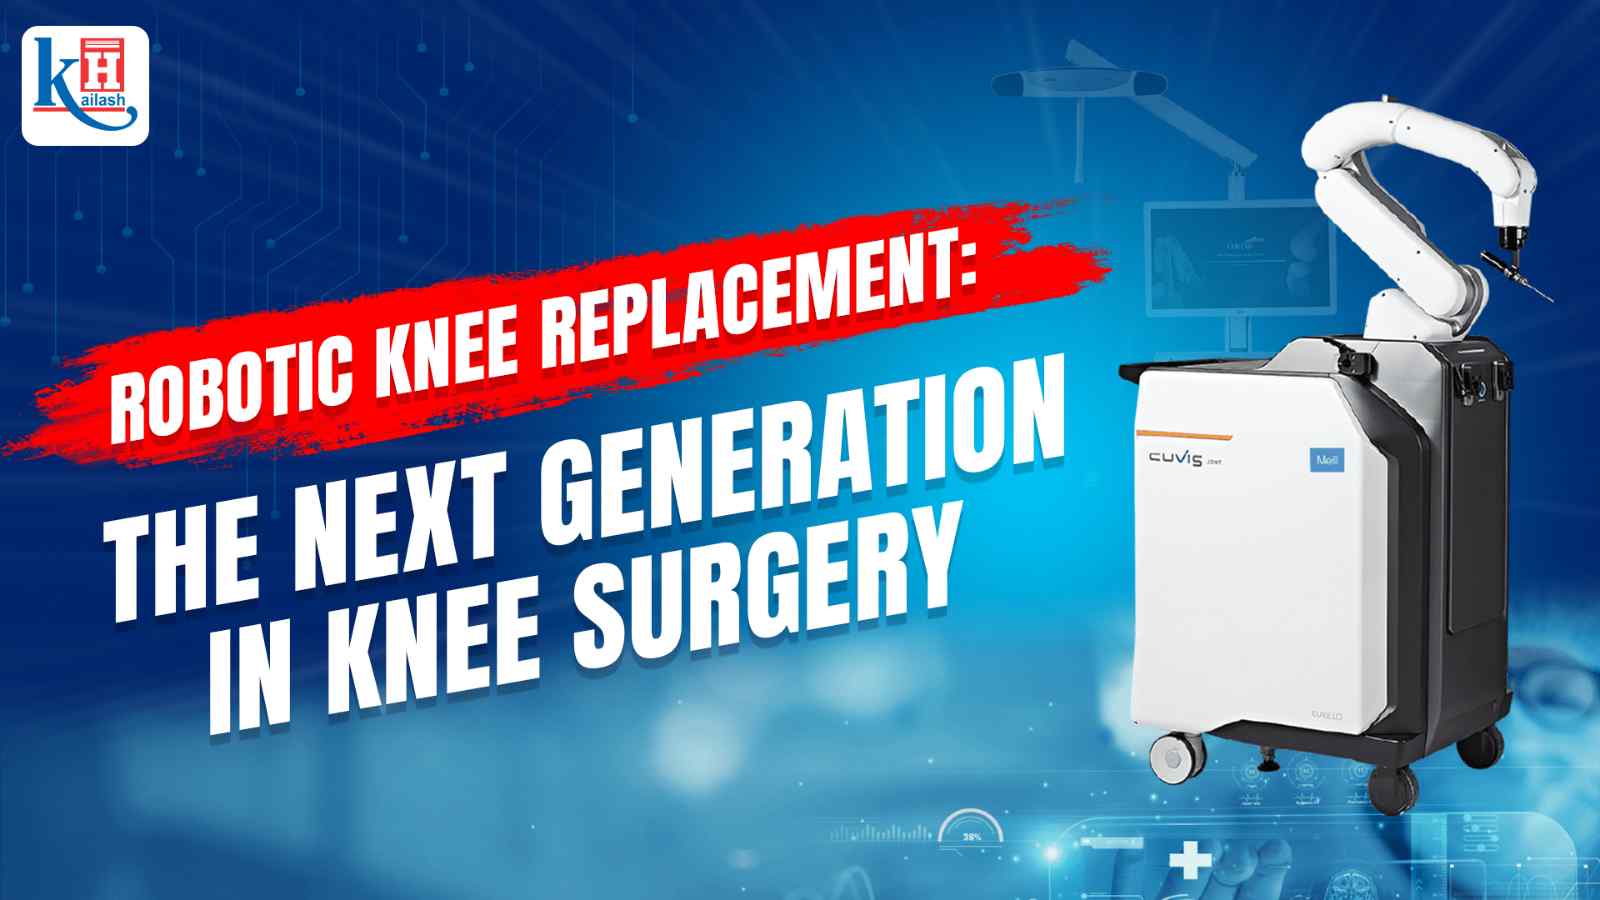 Robotic Knee Replacement: The Next Generation in Knee Surgery